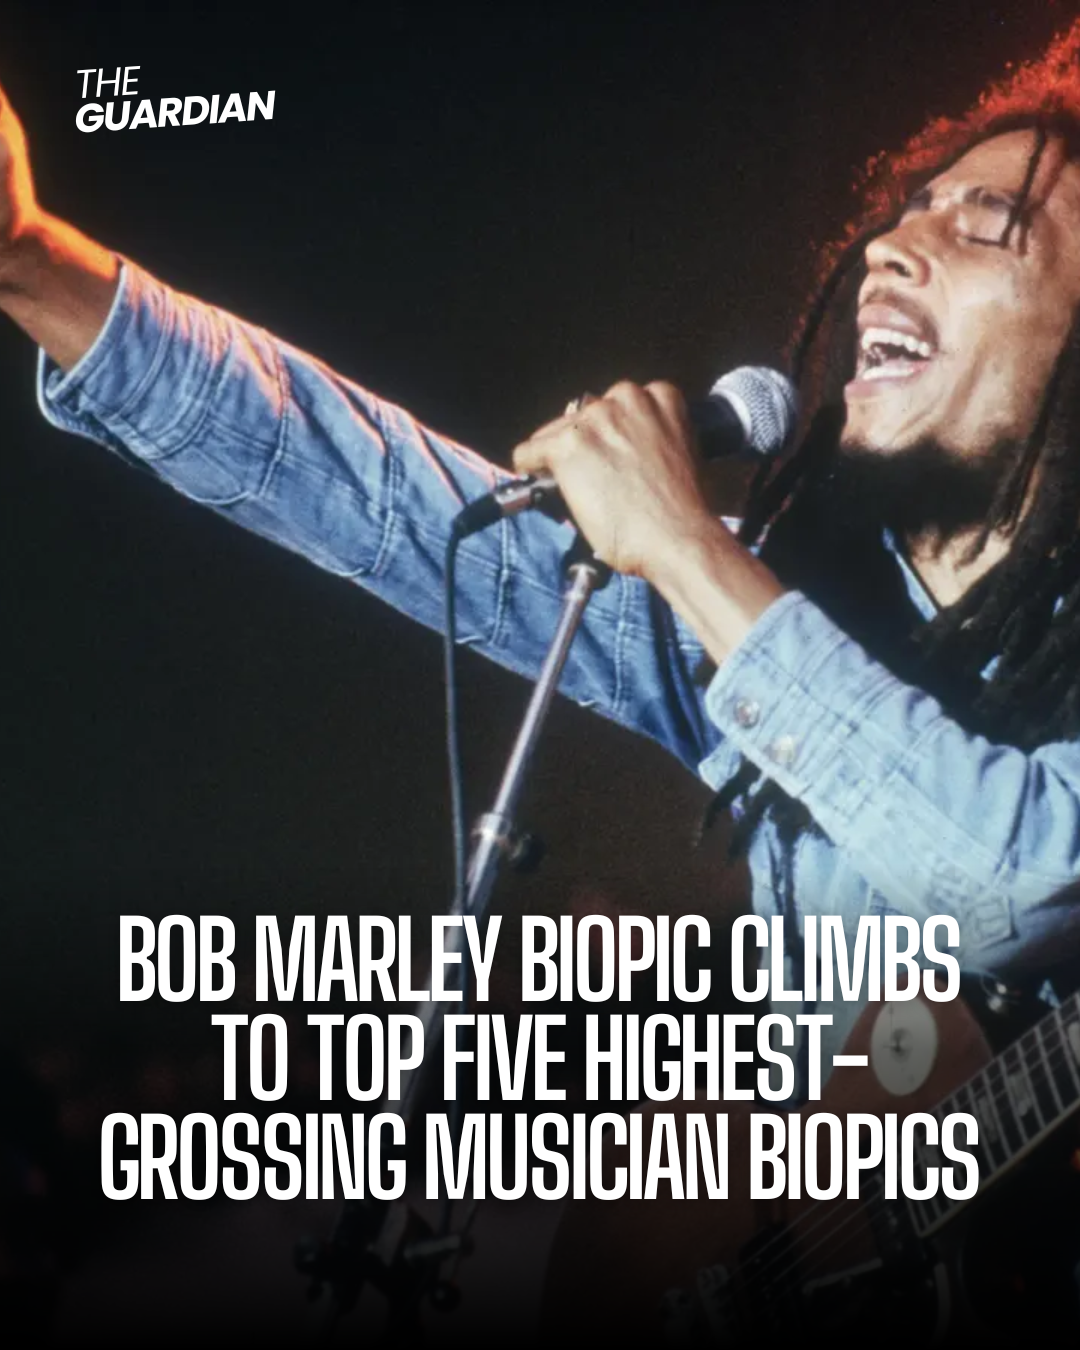 Bob Marley: One Love ranks fifth among the highest-grossing musician biopics.